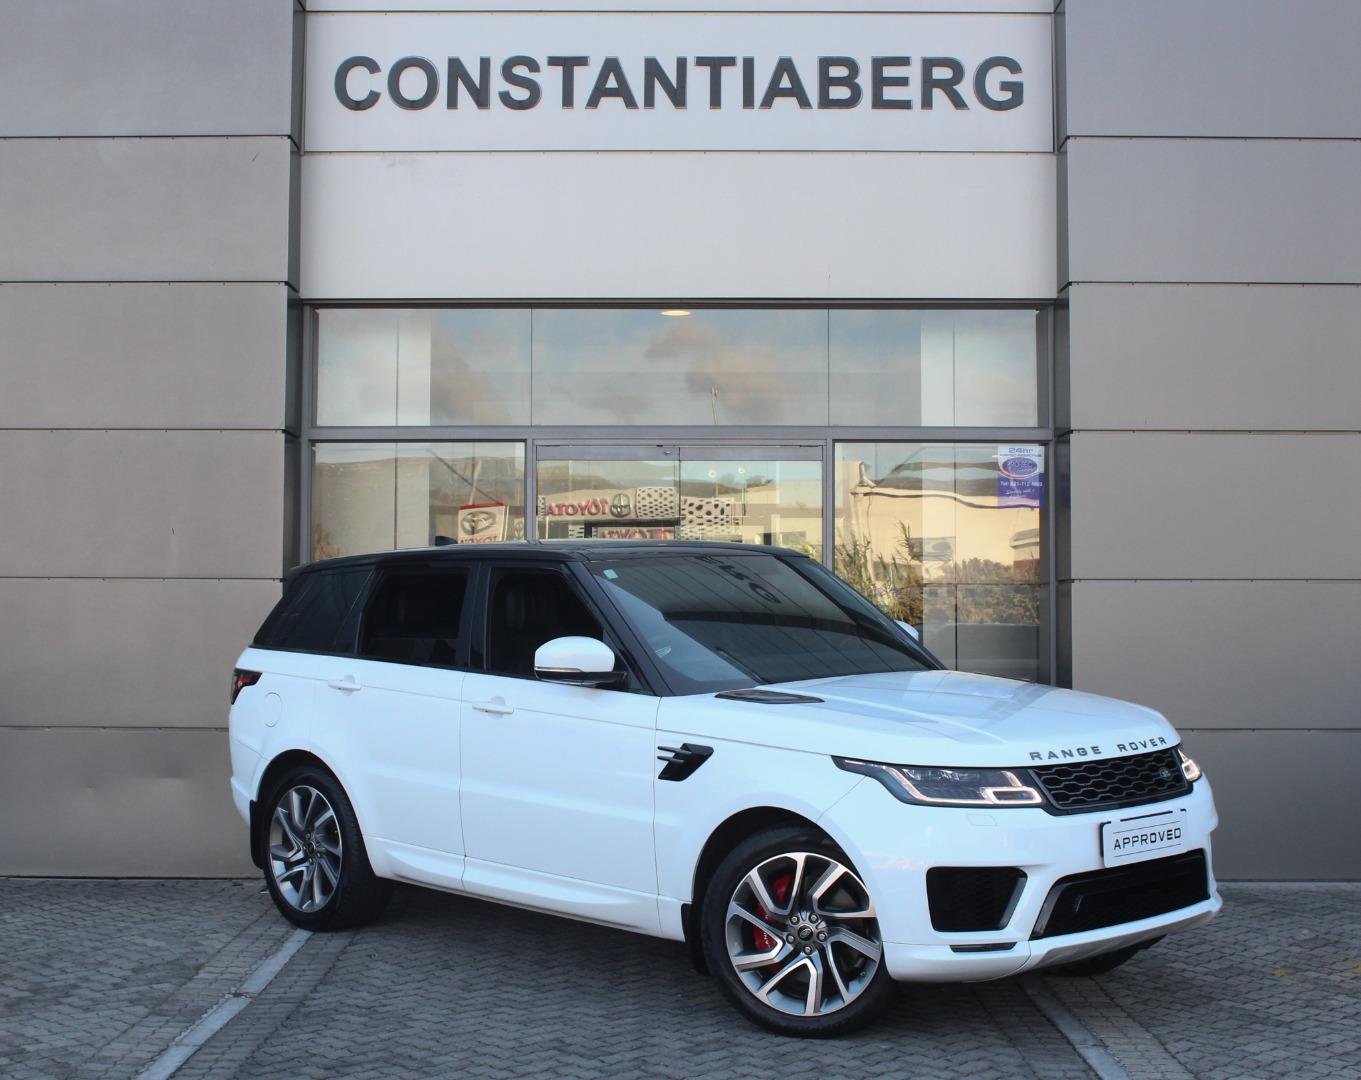 2021 Land Rover Range Rover Sport  for sale - 556663